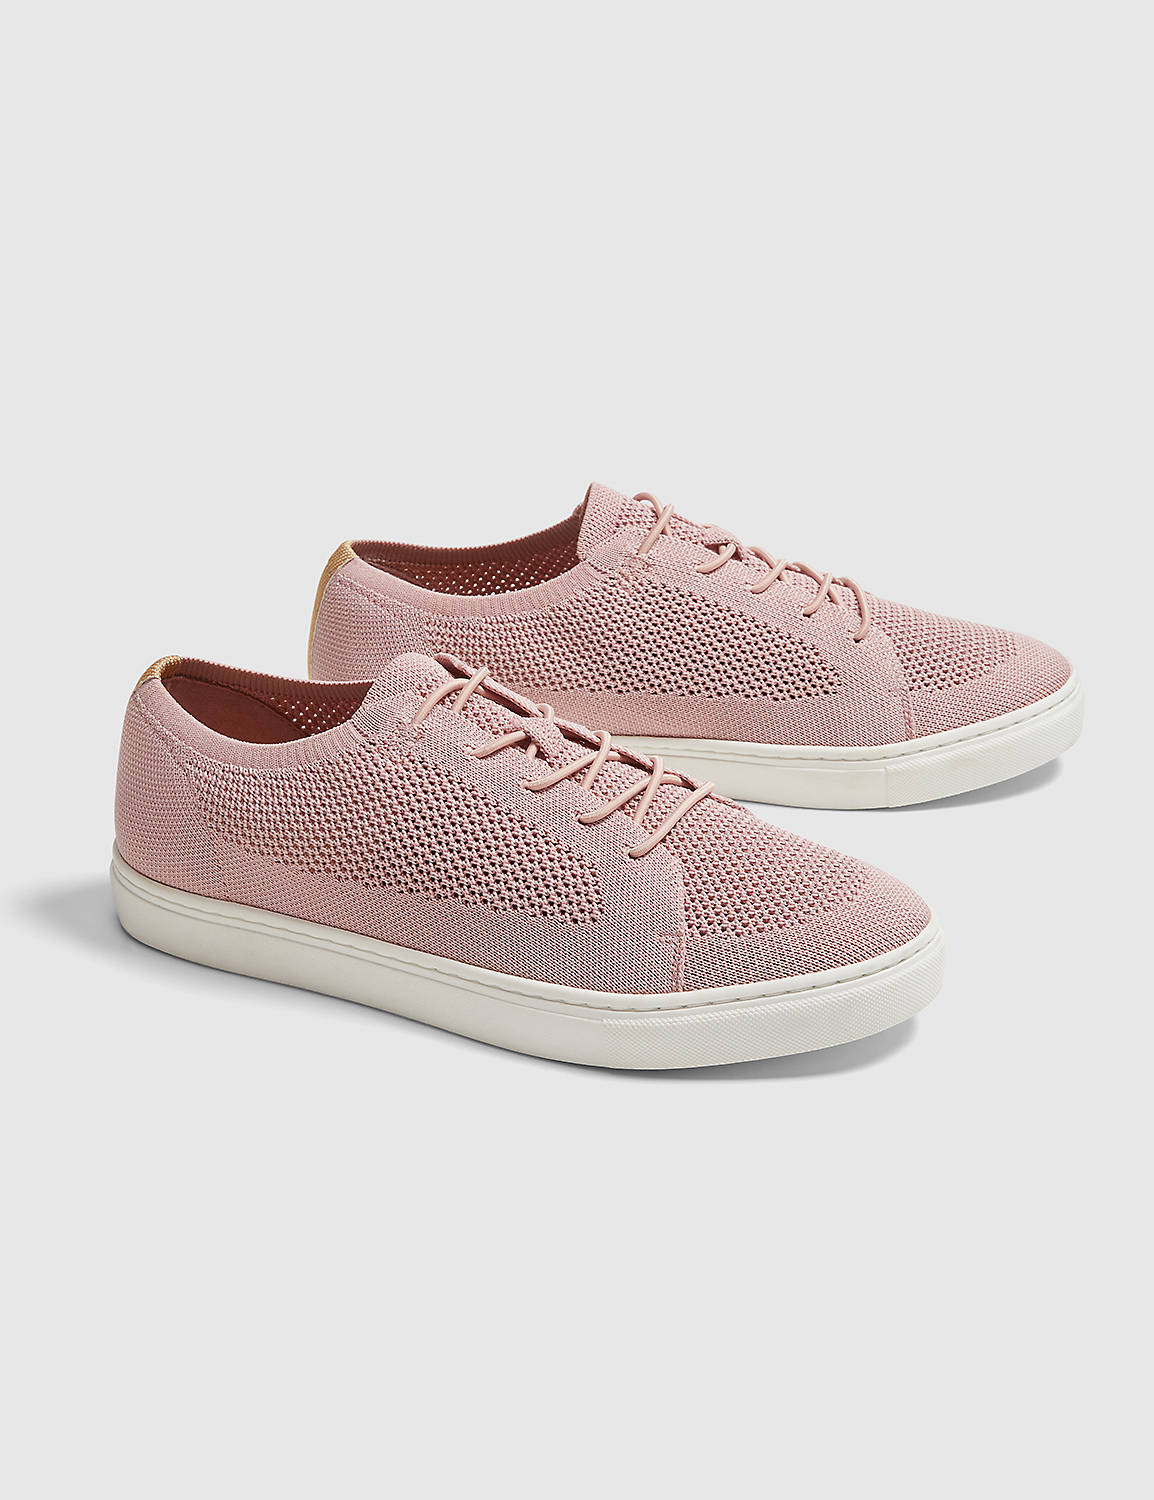 Elastic Lace Slip-on Knit Sneaker Product Image 1